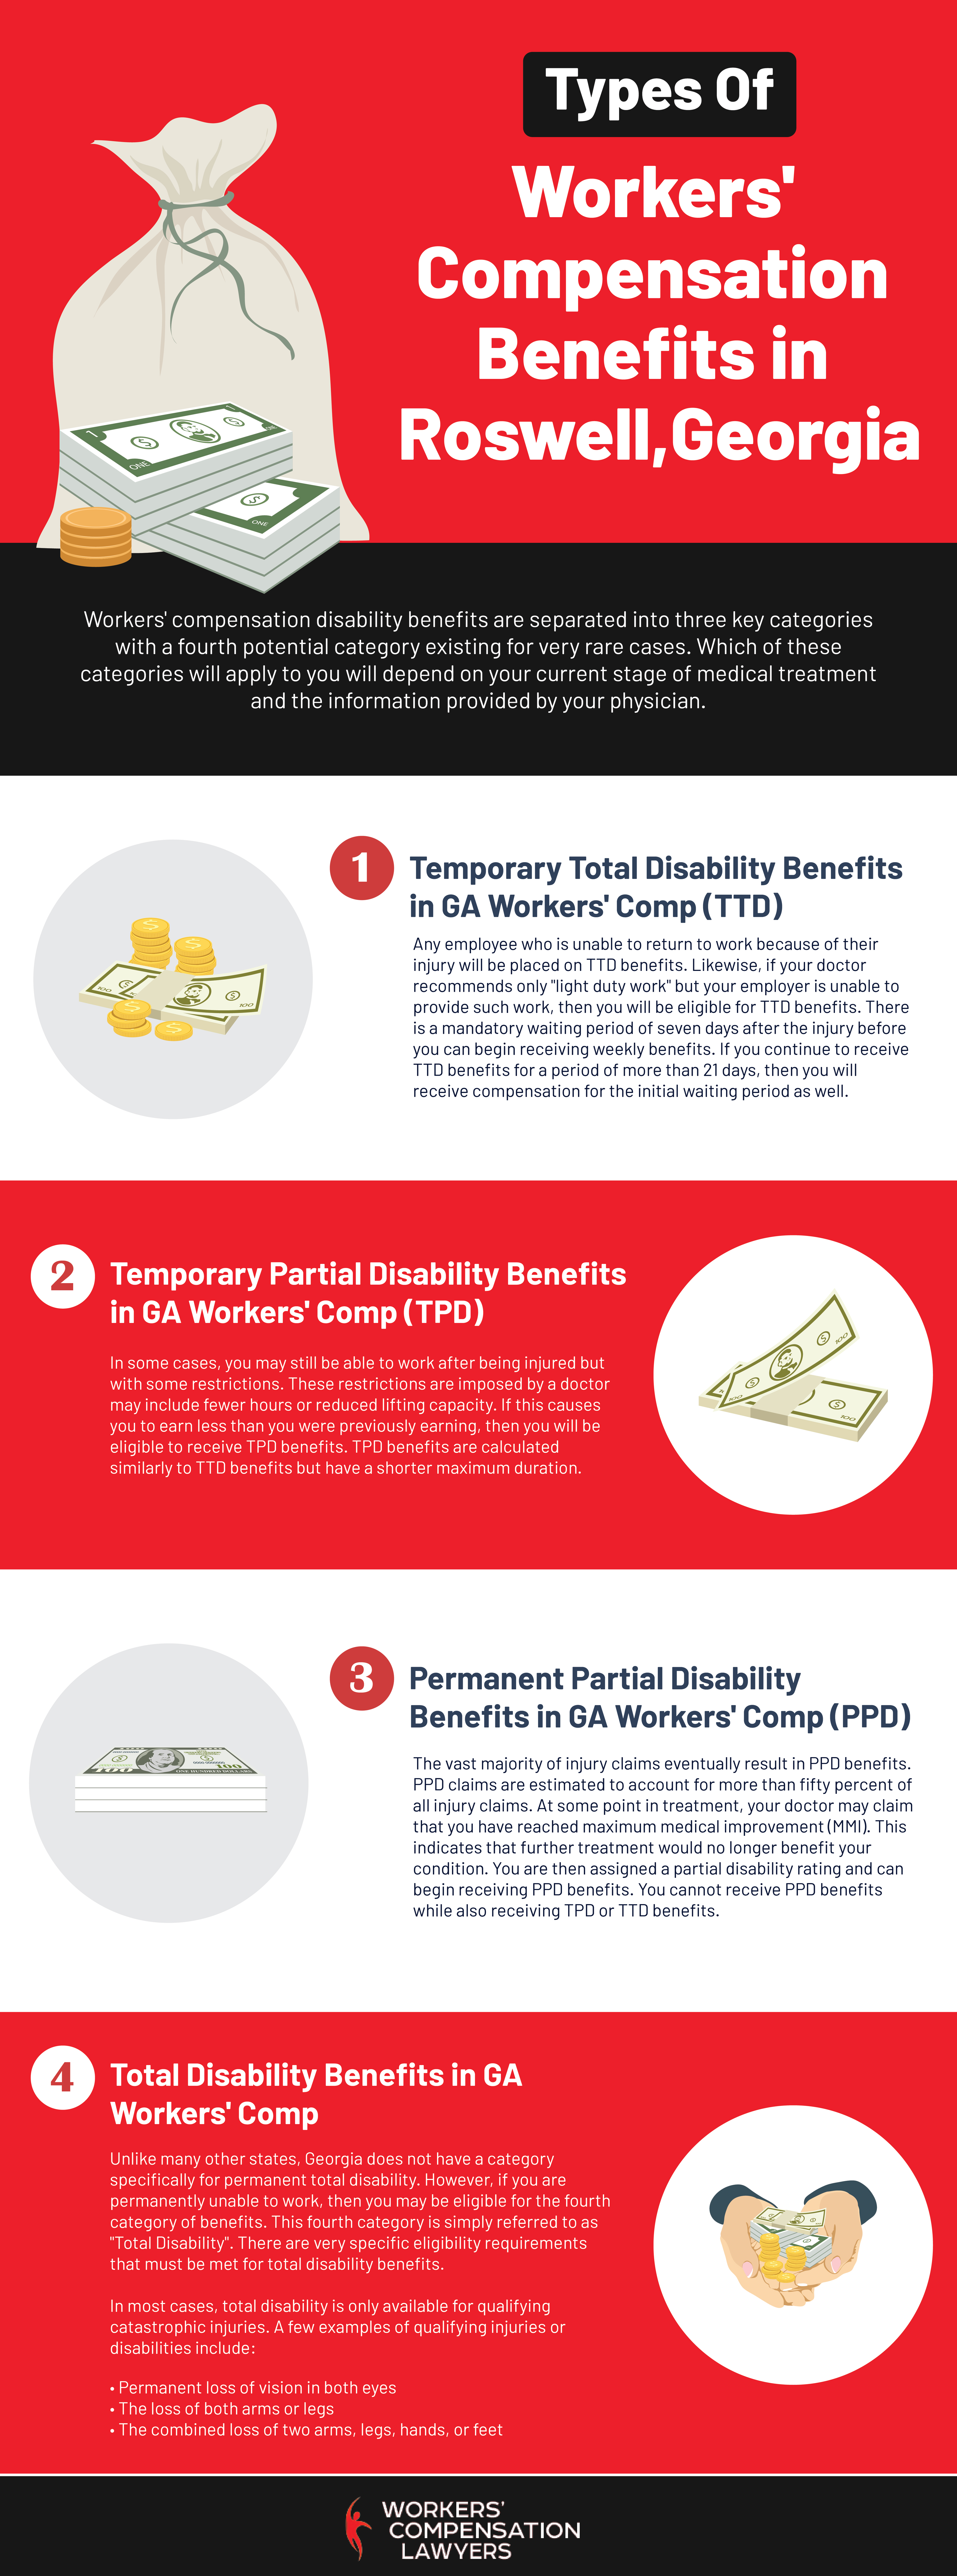 Roswell Workers Compensation Benefits Infographic